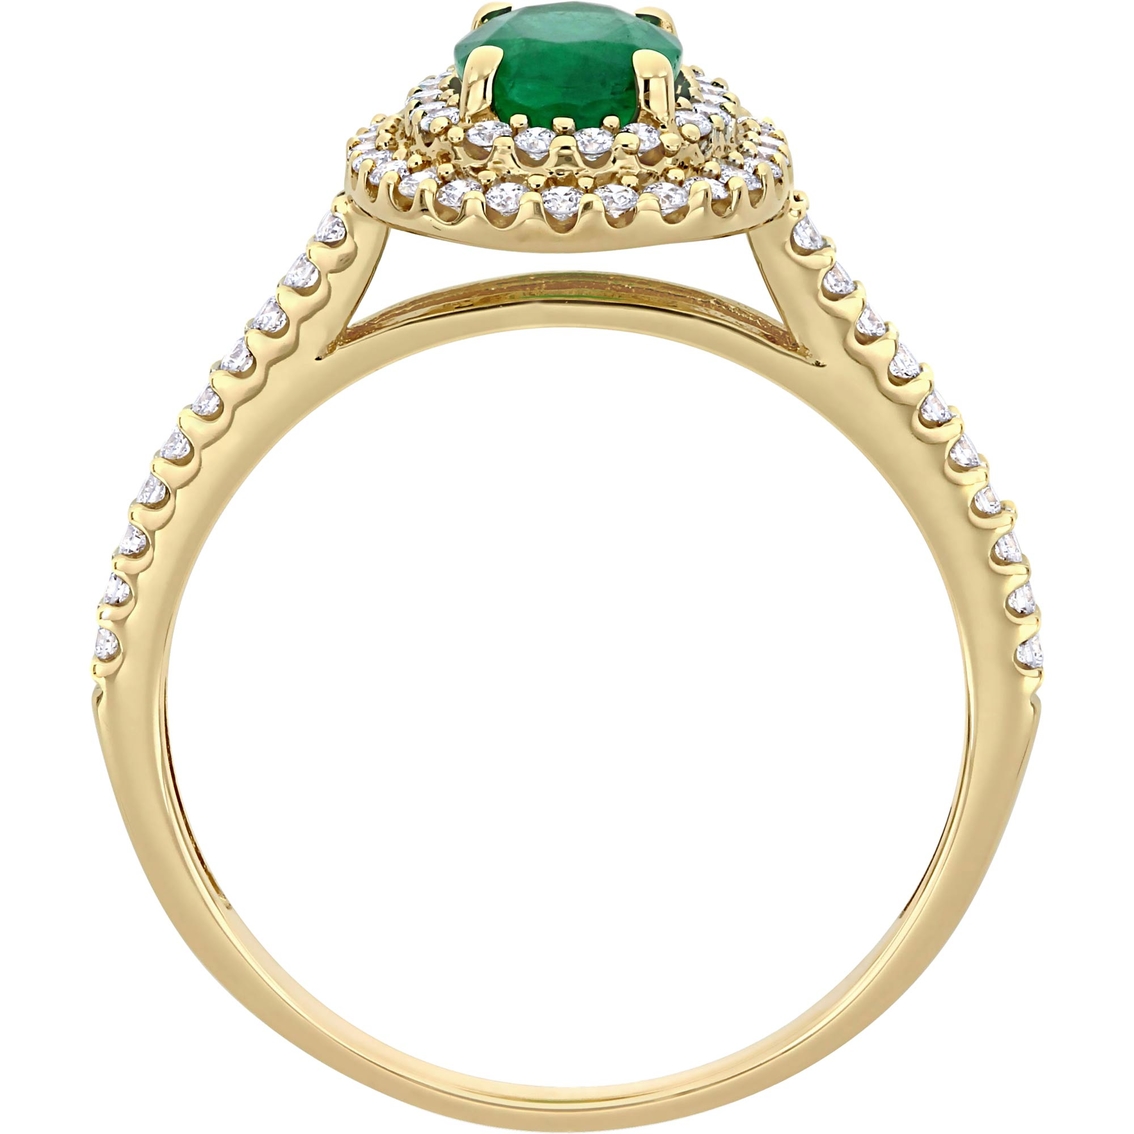 Sofia B. 14K Yellow Gold Oval Cut Emerald and 1/3 CTW Diamond Double Halo Ring - Image 2 of 4